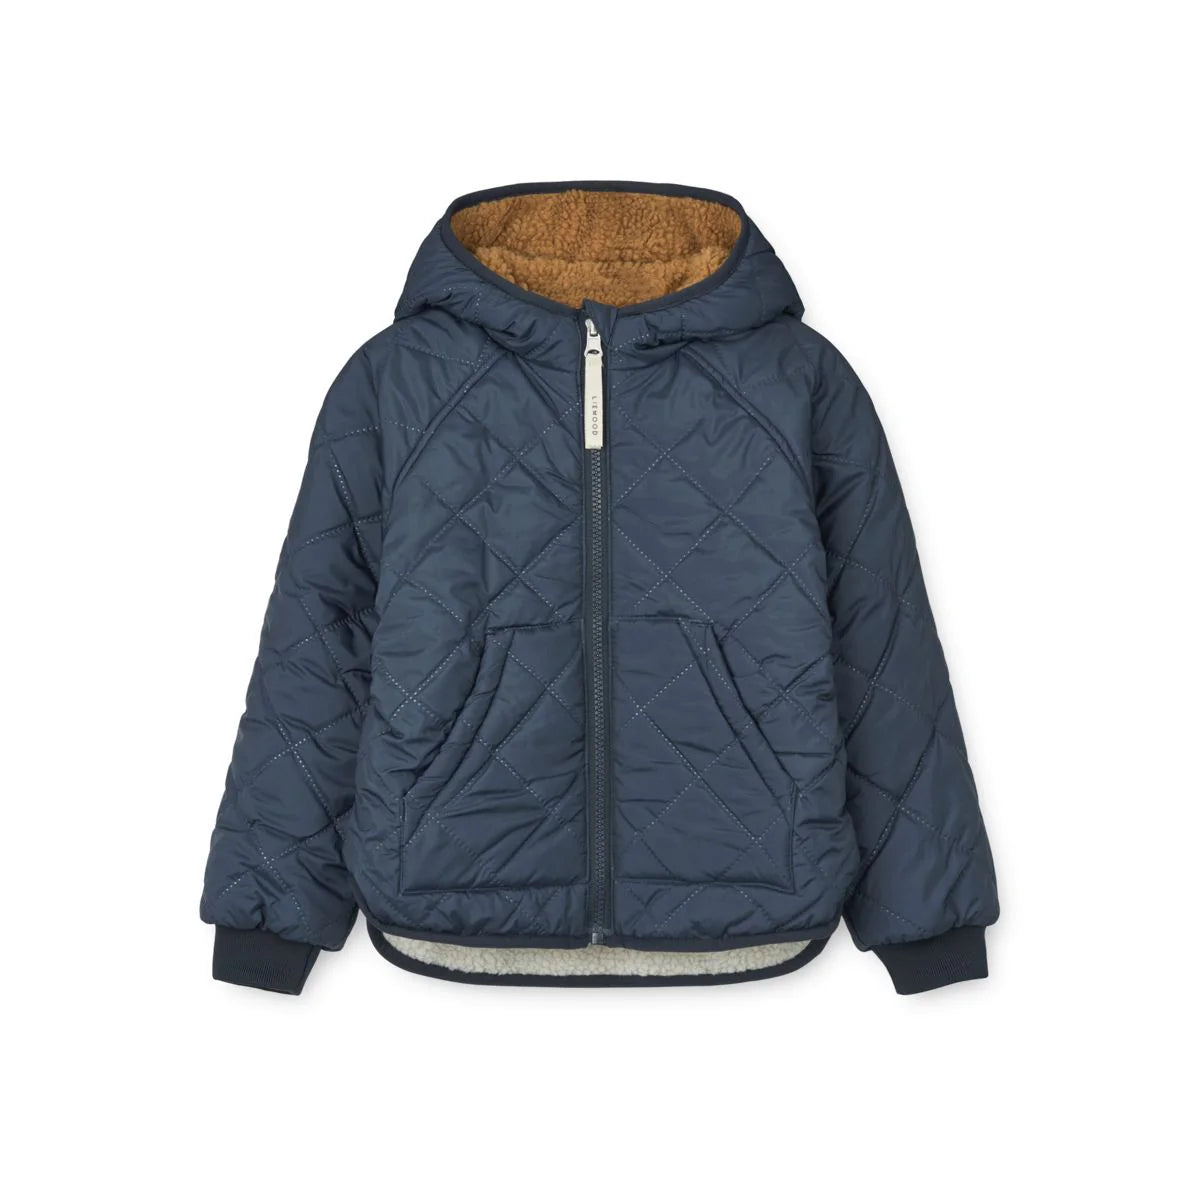 Load image into Gallery viewer, Jackson Reversible Jacket Navy
